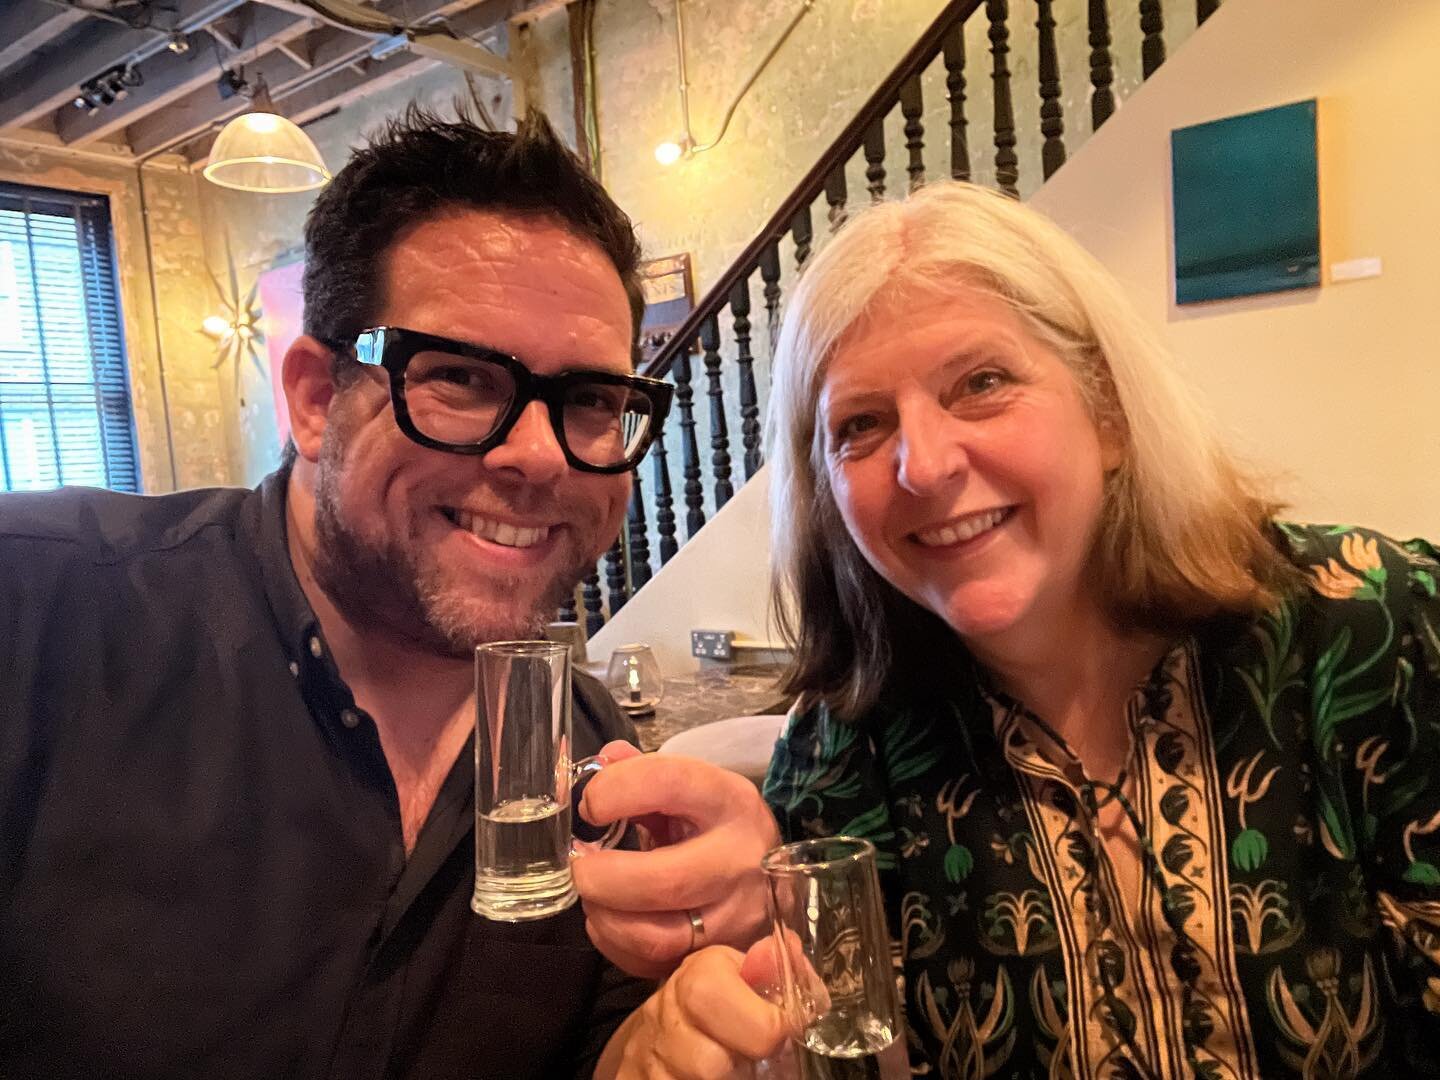 #happyworldginday

Cheers to all you gin lovers out there with love from Madam Geneva &amp; Gent.

#gin #ginday #ginplease #ginsofinstagram #drinksofinstagram #gintasting #ginlovers #ginplease #ginstagram #ginoclock #ginexperiences #gintastingonline 